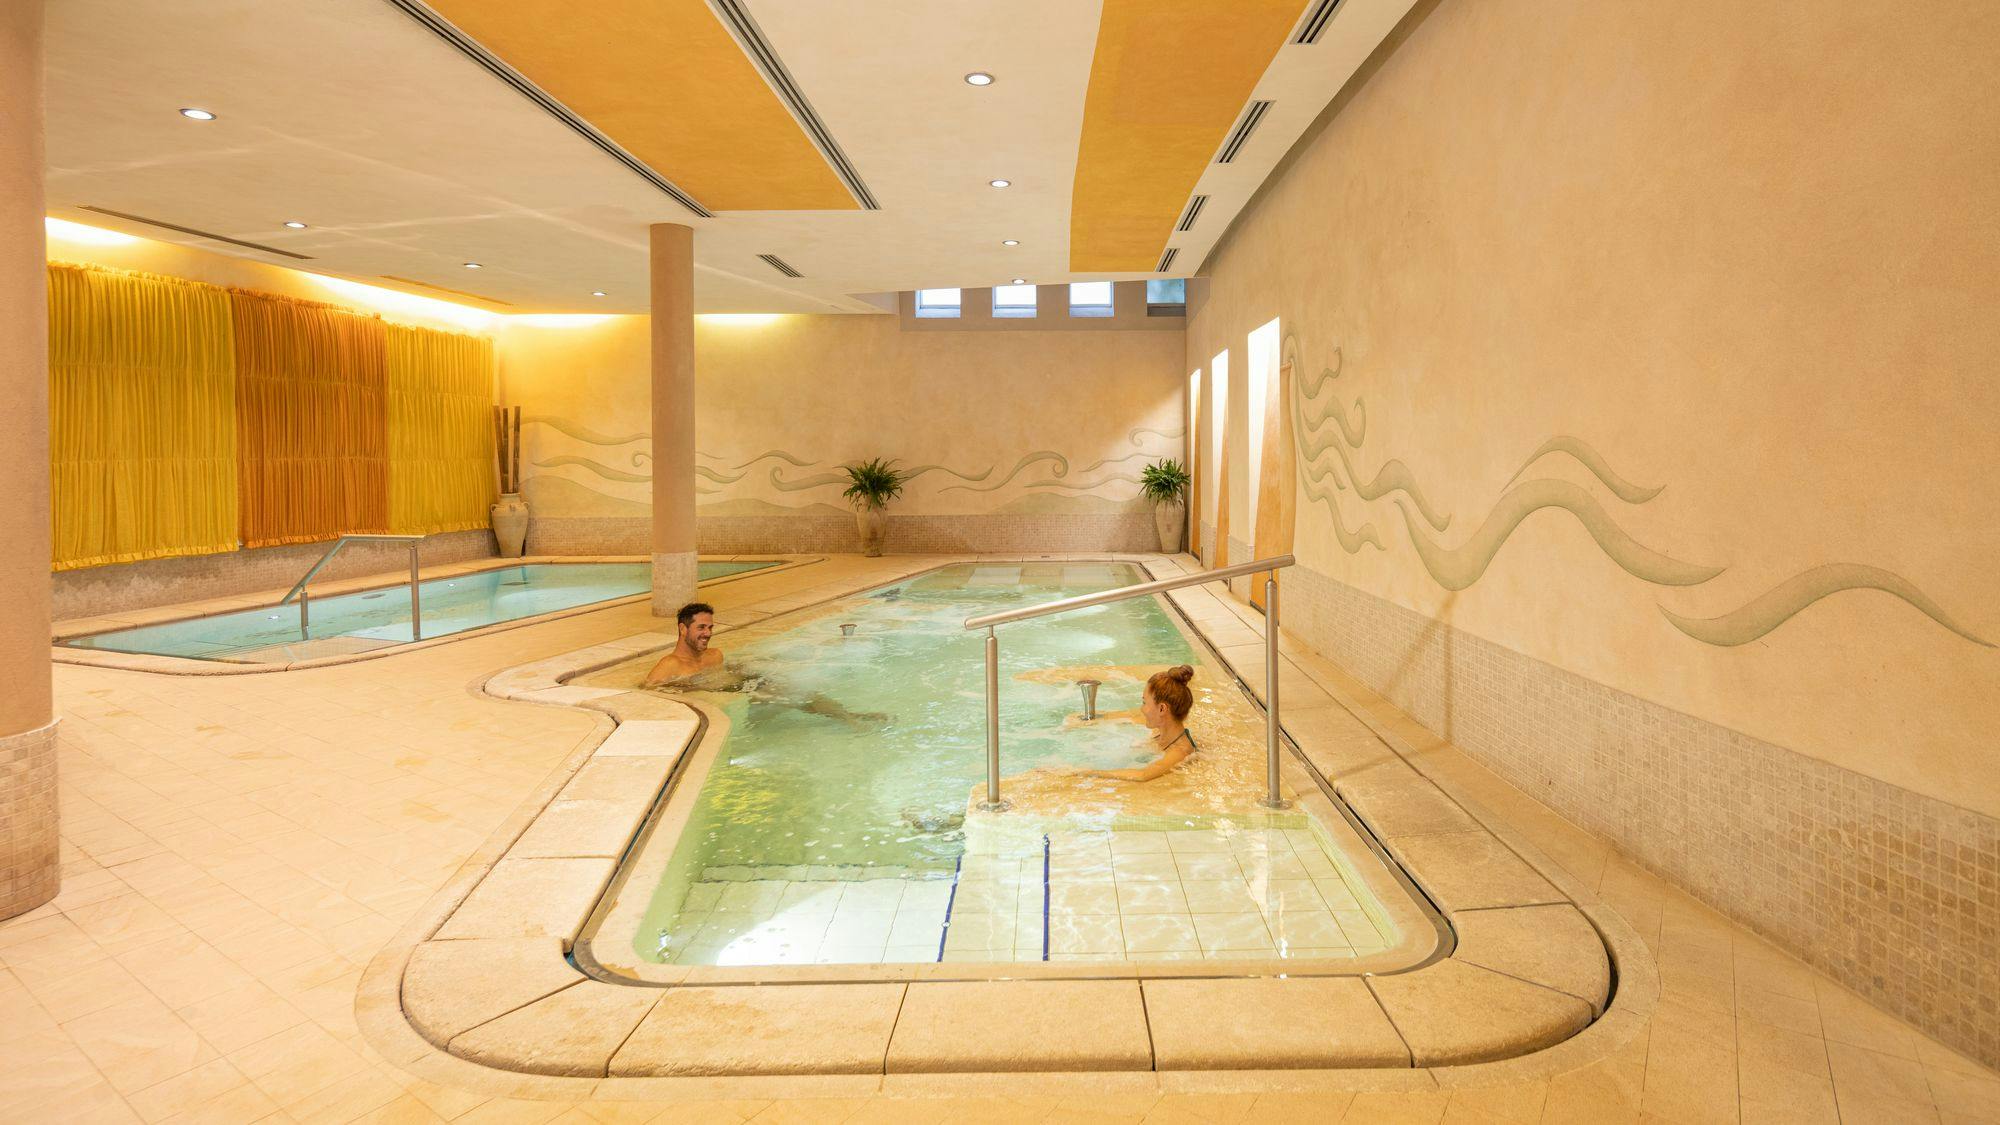 Spa-pool-people-vacation-hotel